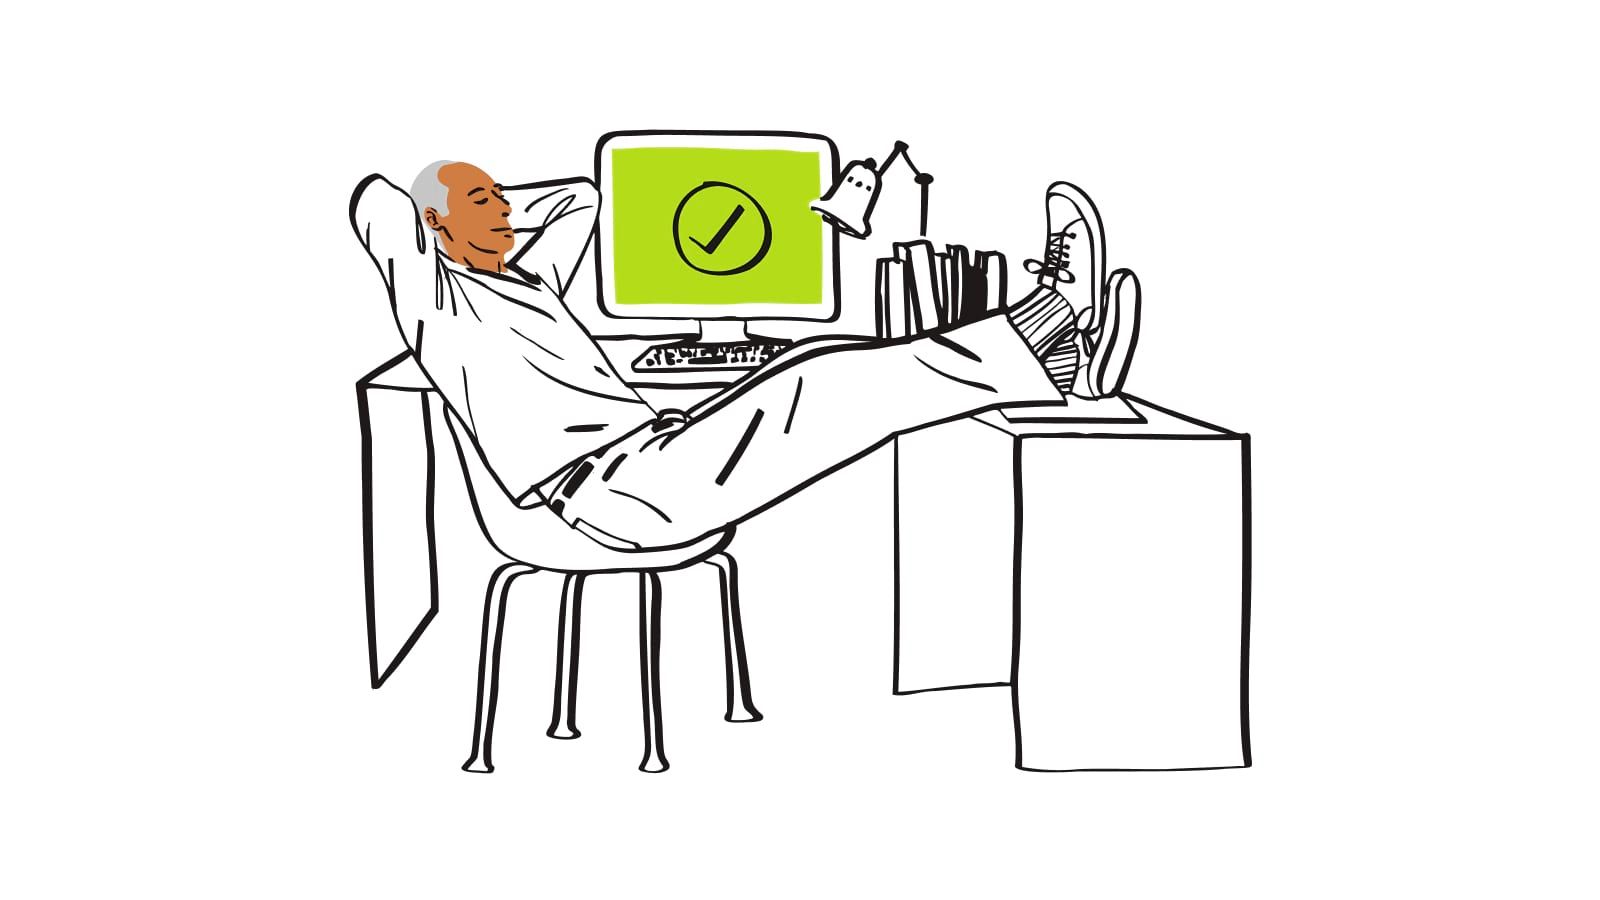 An illustration of a person relaxing in front of a computer monitor, with their feet up on the desk